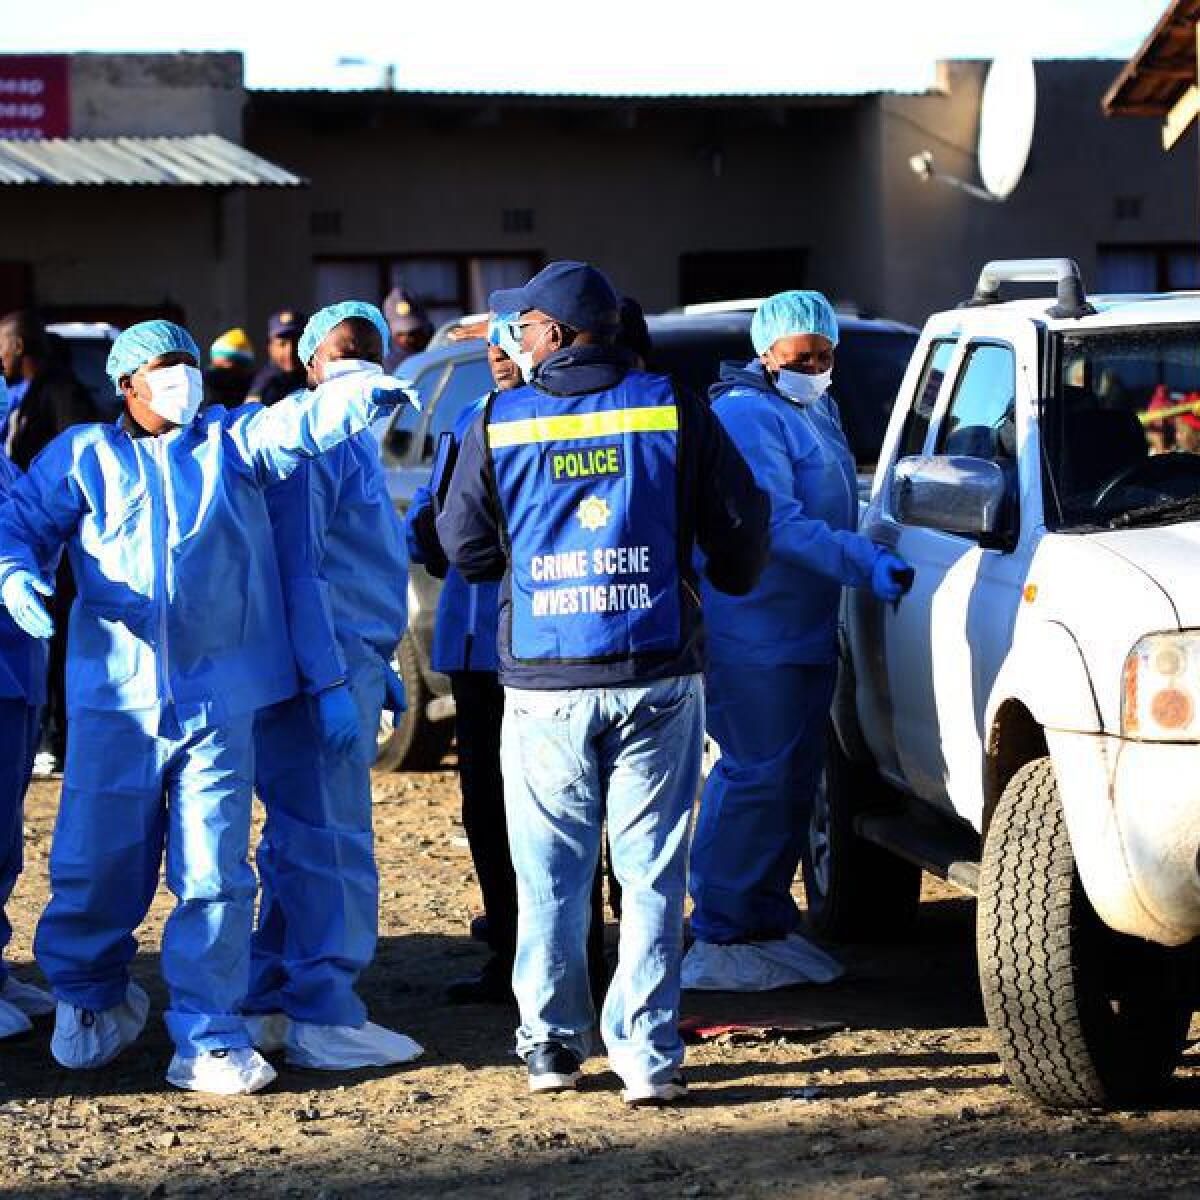 Police and forensics experts at scene of tavern in South Africa